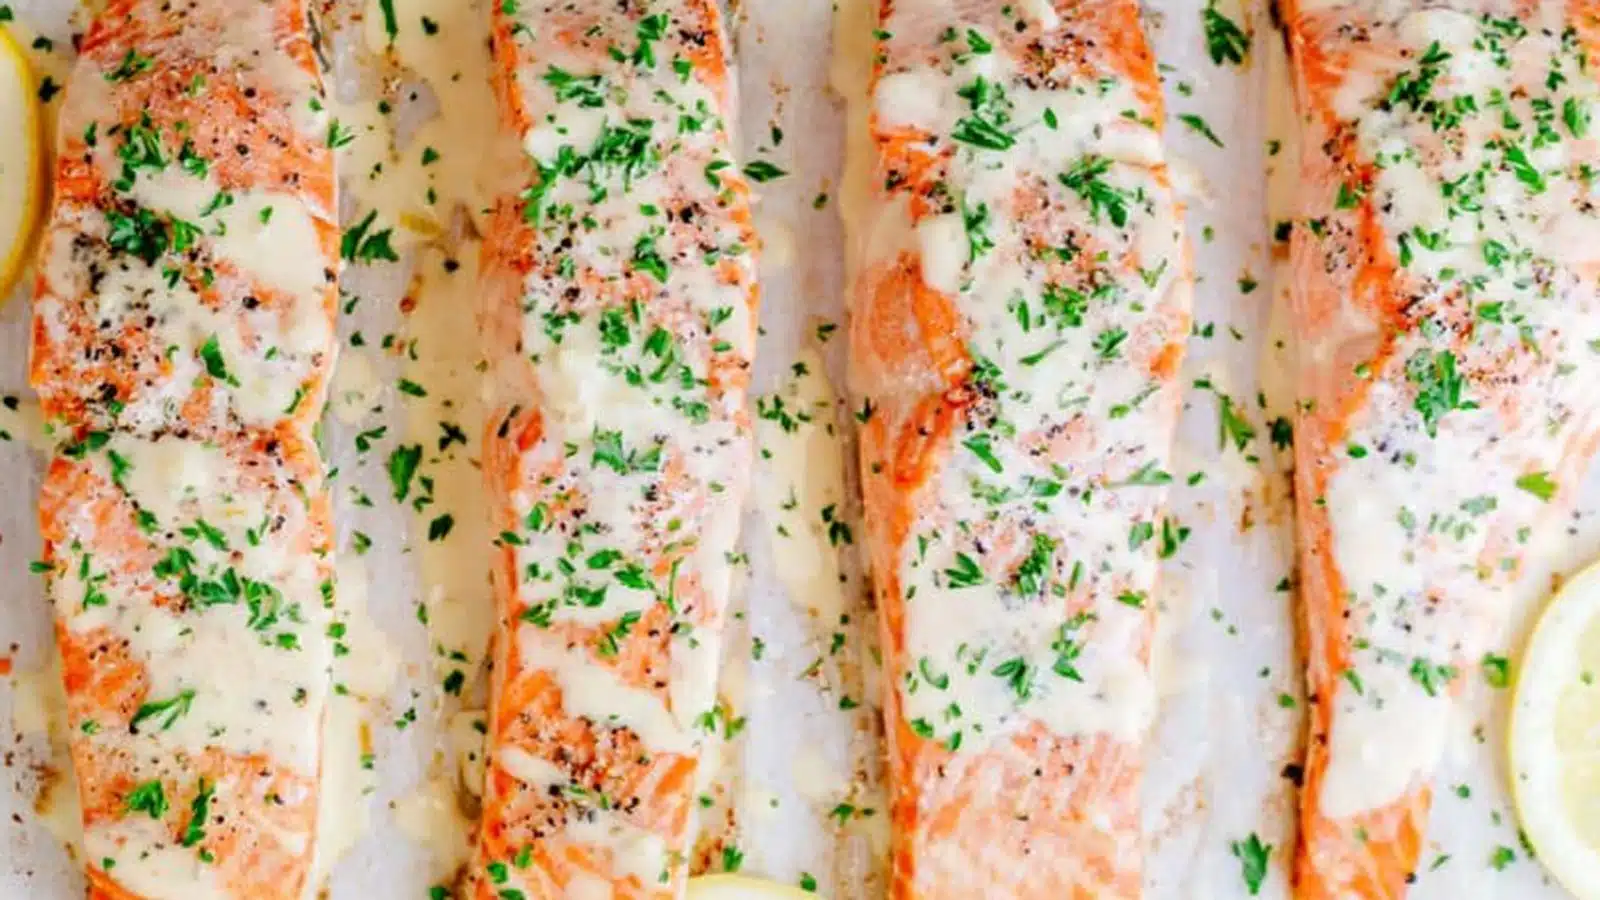 baked salmon with lemon caper sauce from Frazie's Meat & Market